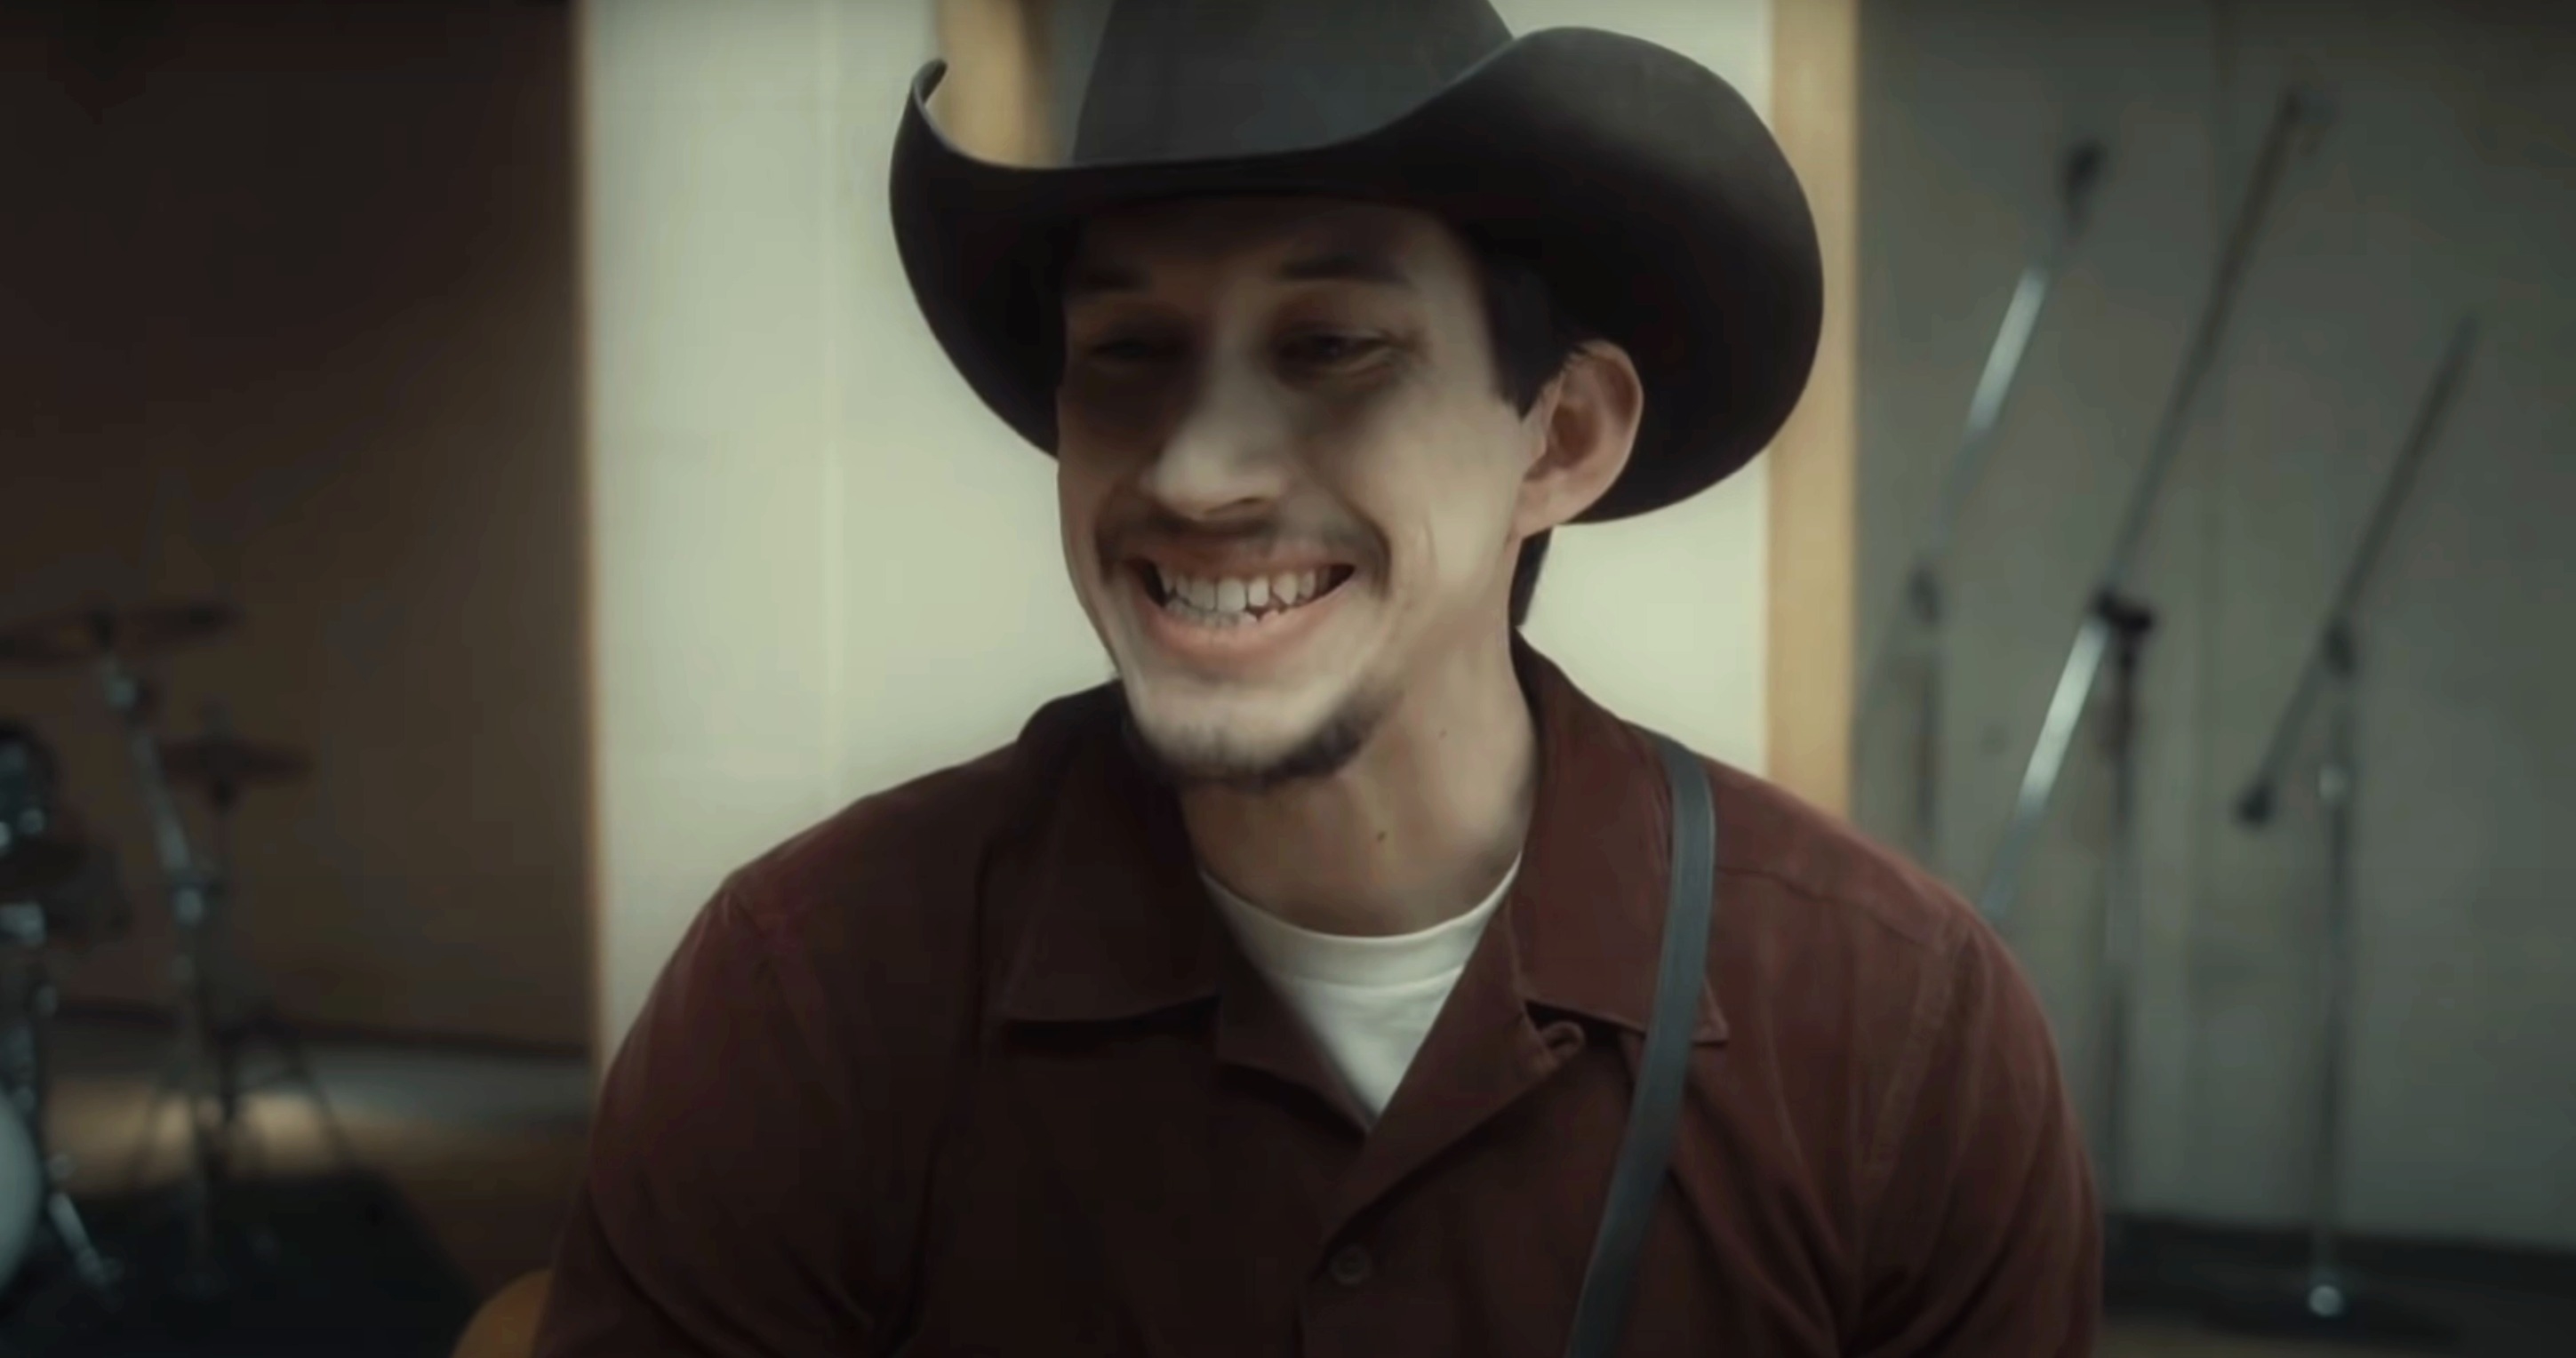 Adam person wearing a cowboy hat and suspenders, sitting indoors and singing